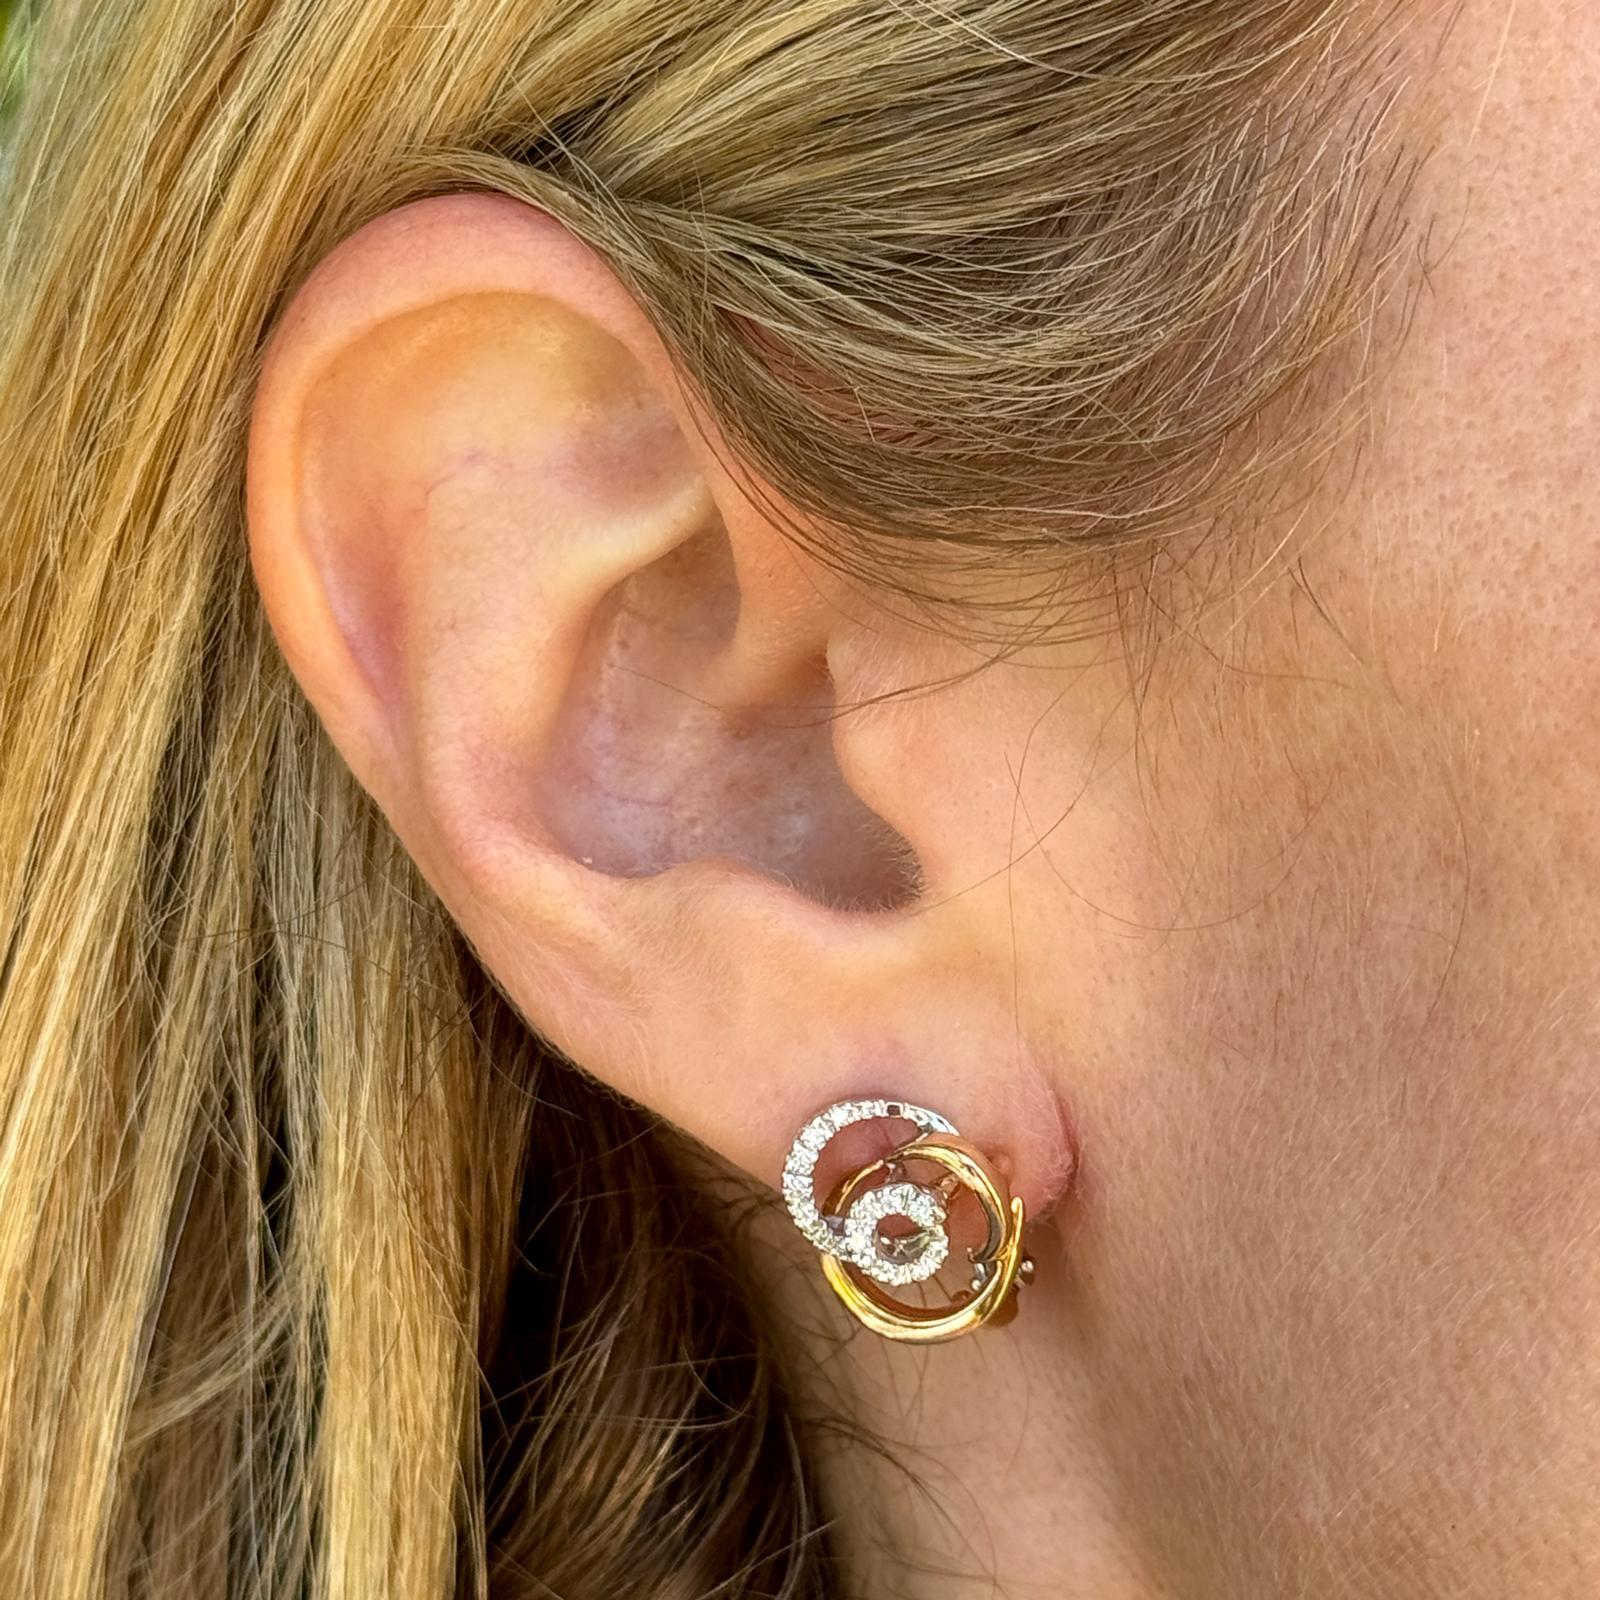 The Diamond Swirl two-tone gold circular stud earrings by Damiani are likely a dazzling and sophisticated pair of earrings, showcasing the brand's expertise in fine jewelry craftsmanship and design. The earrings feature a circular stud design,